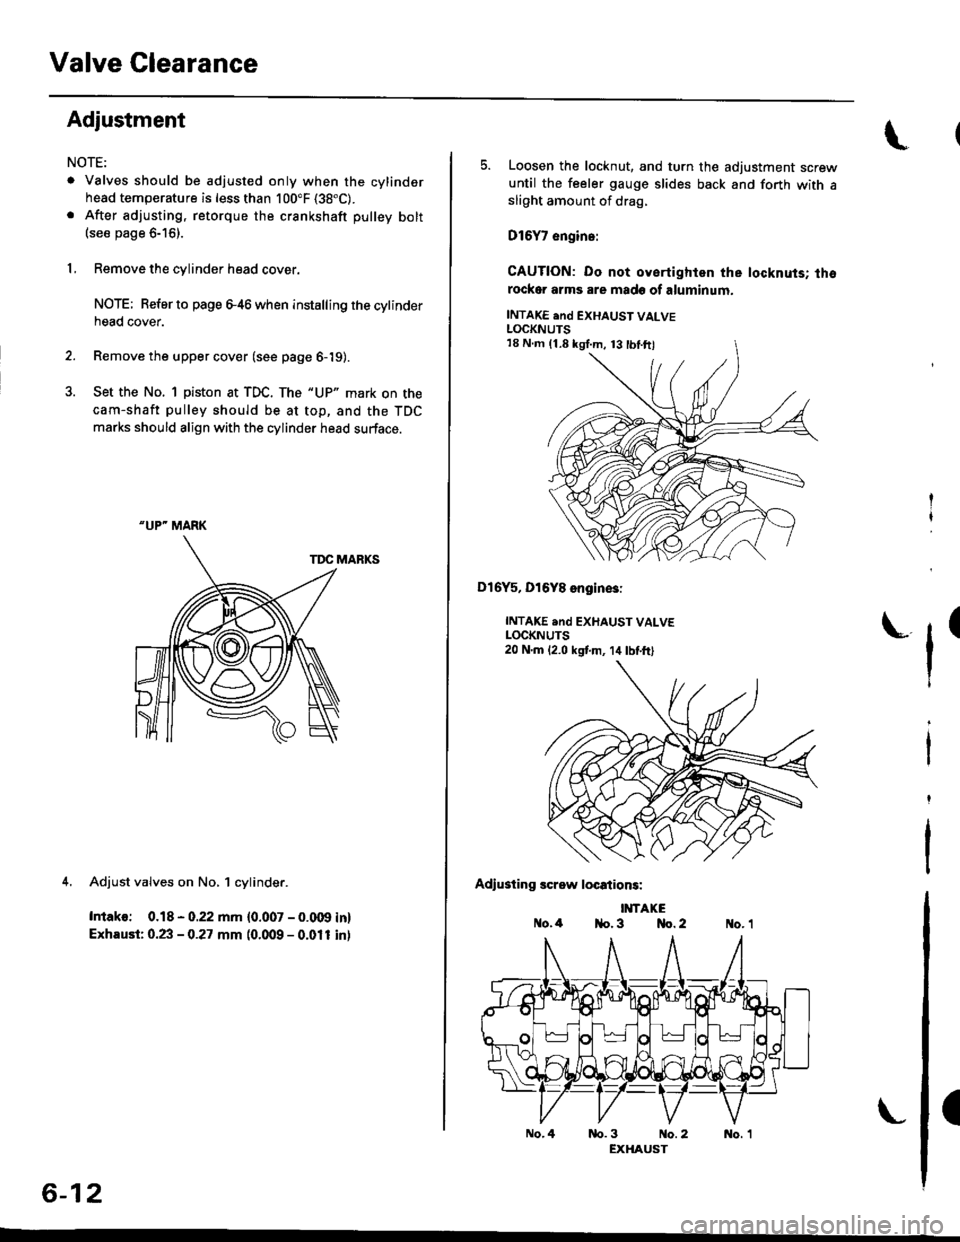 HONDA CIVIC 1999 6.G Workshop Manual Valve Clearance
Adjustment
NOTE:
. Valves should be adjusted only when the cylindsrhead temperature is less than 100"F (38"C).
. After adjusting, retorque the crankshaft pulley bolt(see page 6-16).
1,